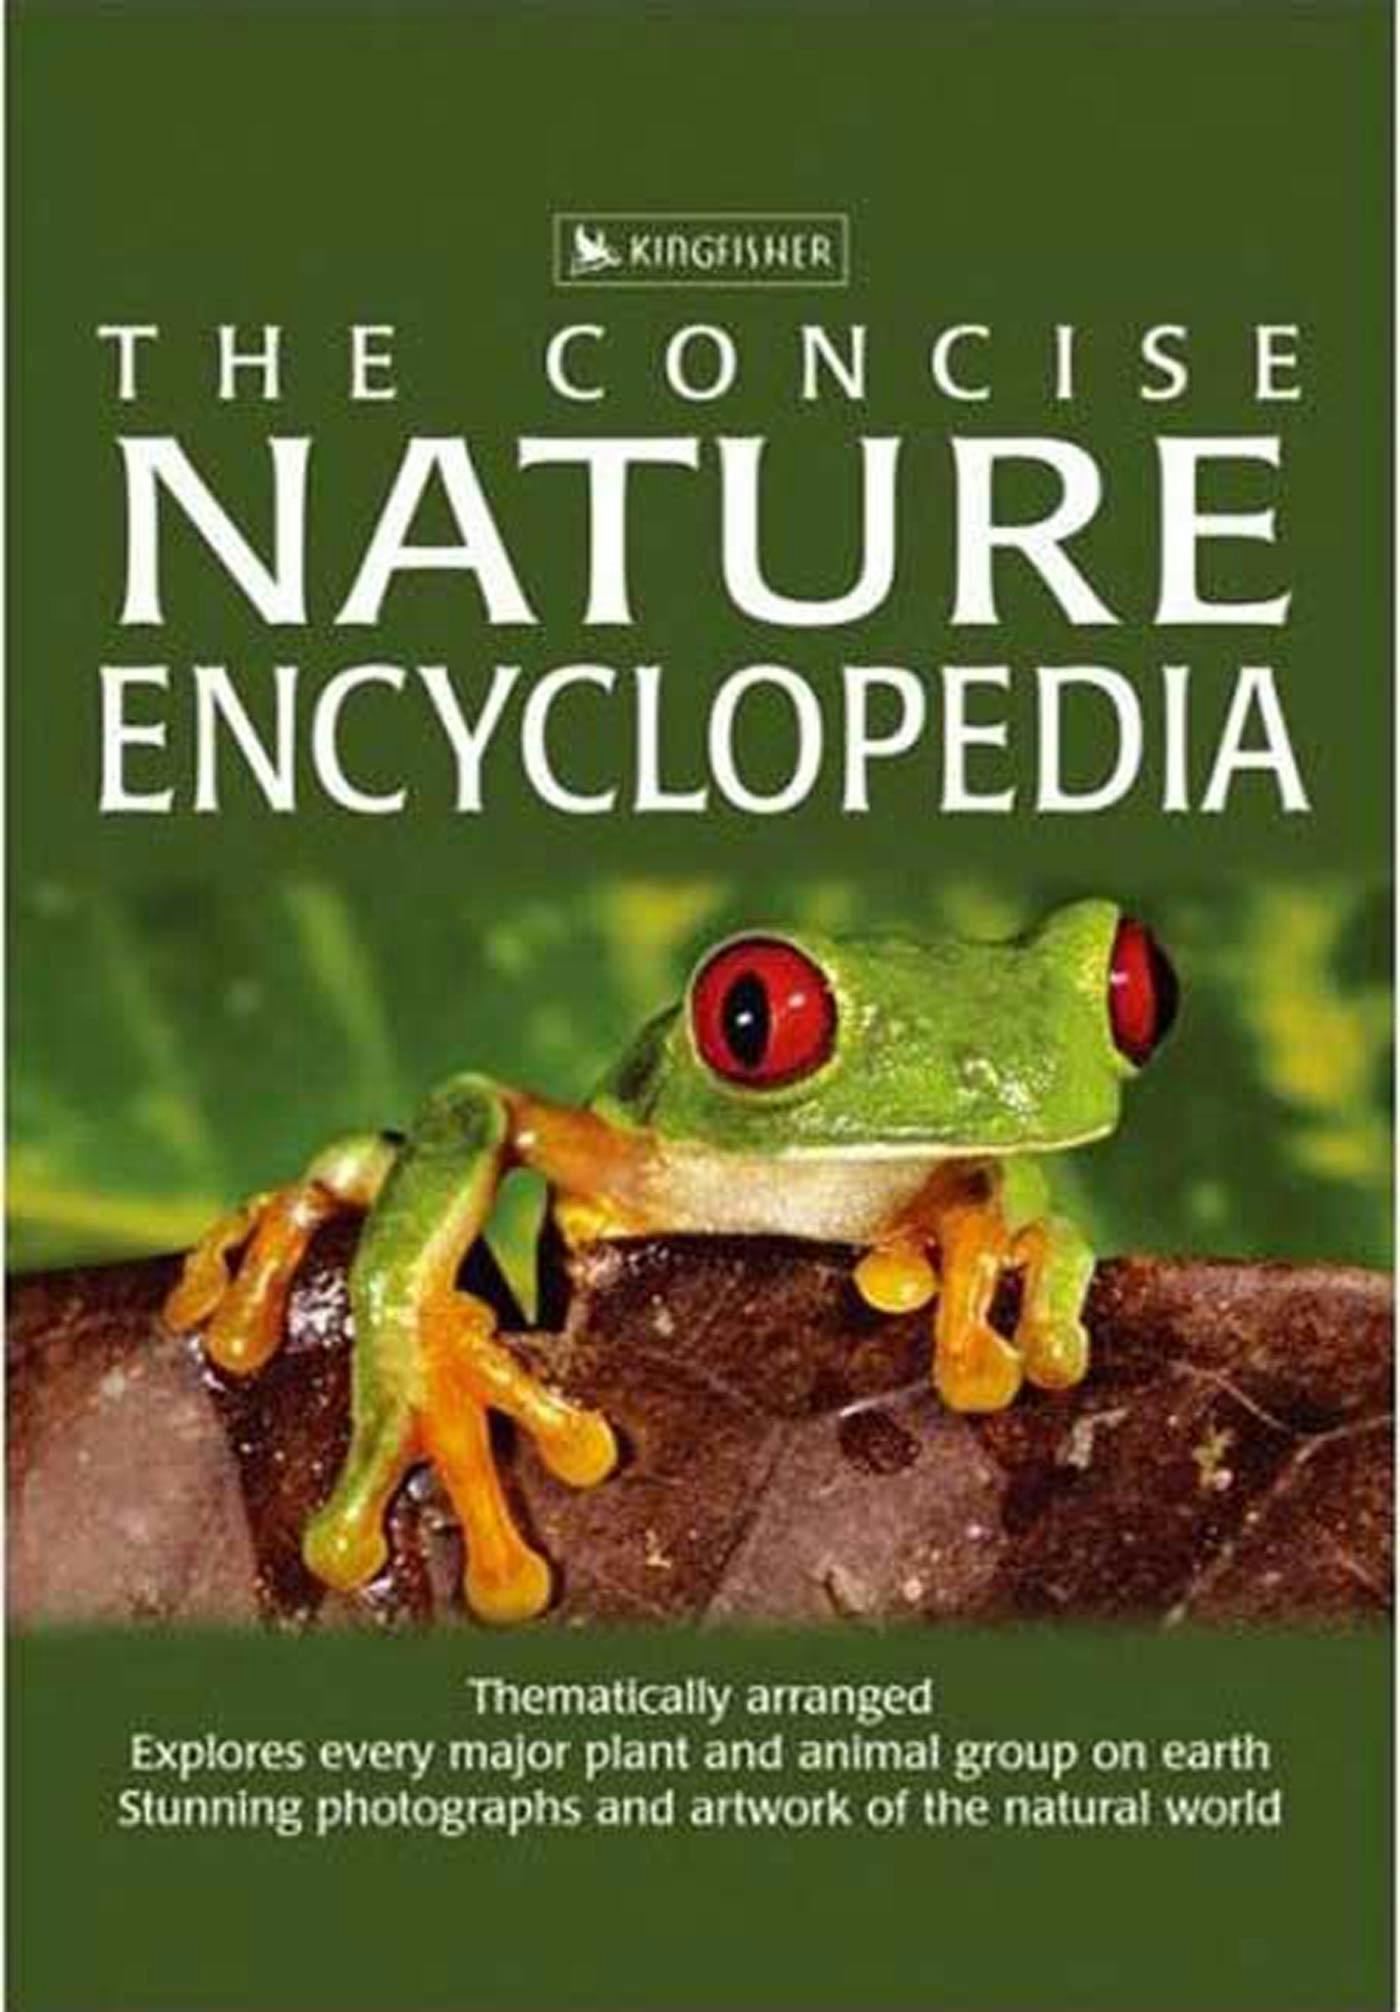 Image of The Concise Nature Encyclopedia